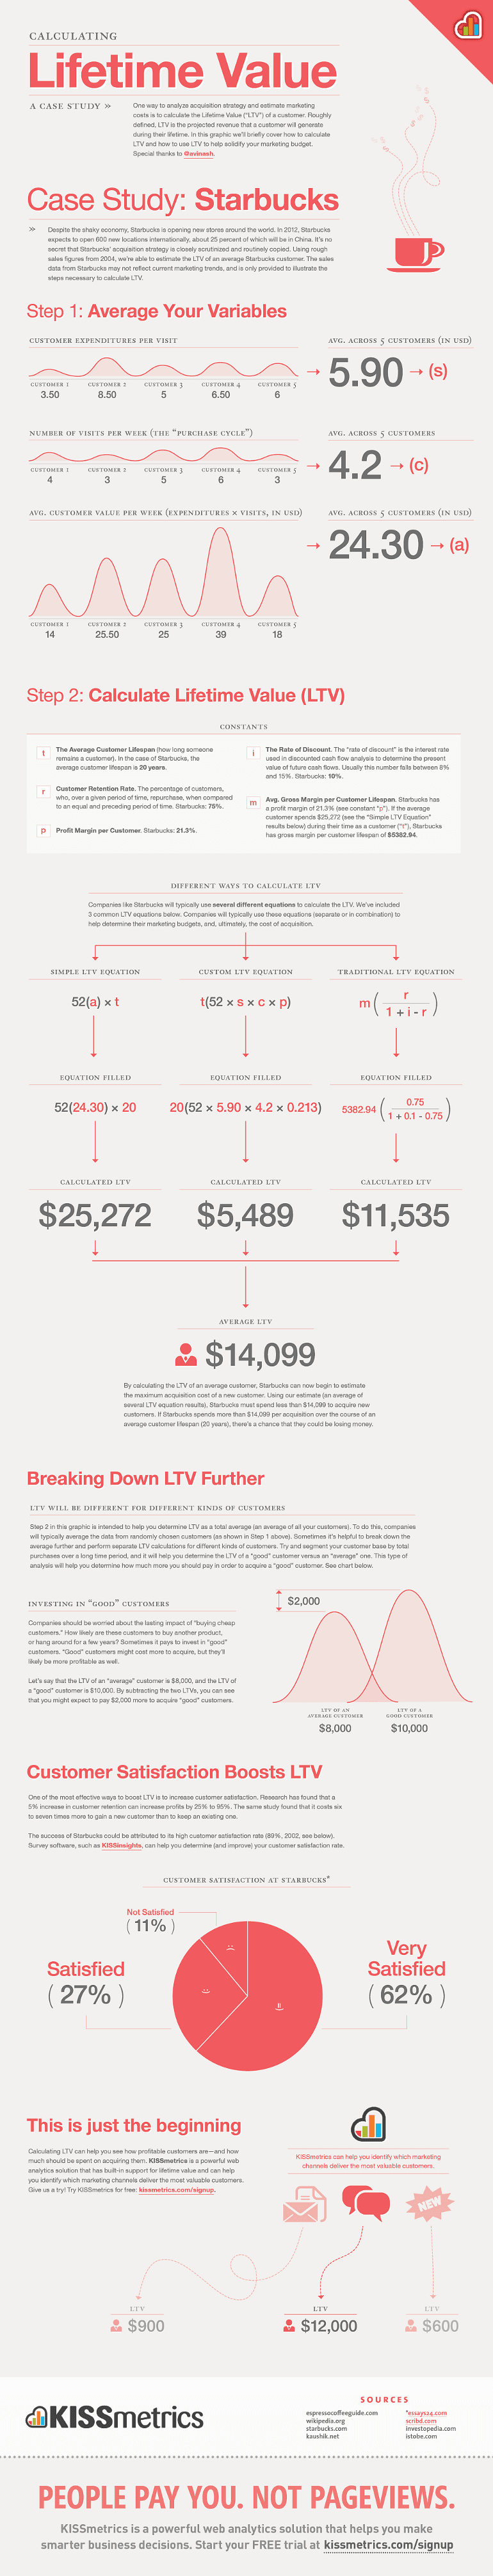 How to Calculate CLV: An Infographic From Kissmetrics